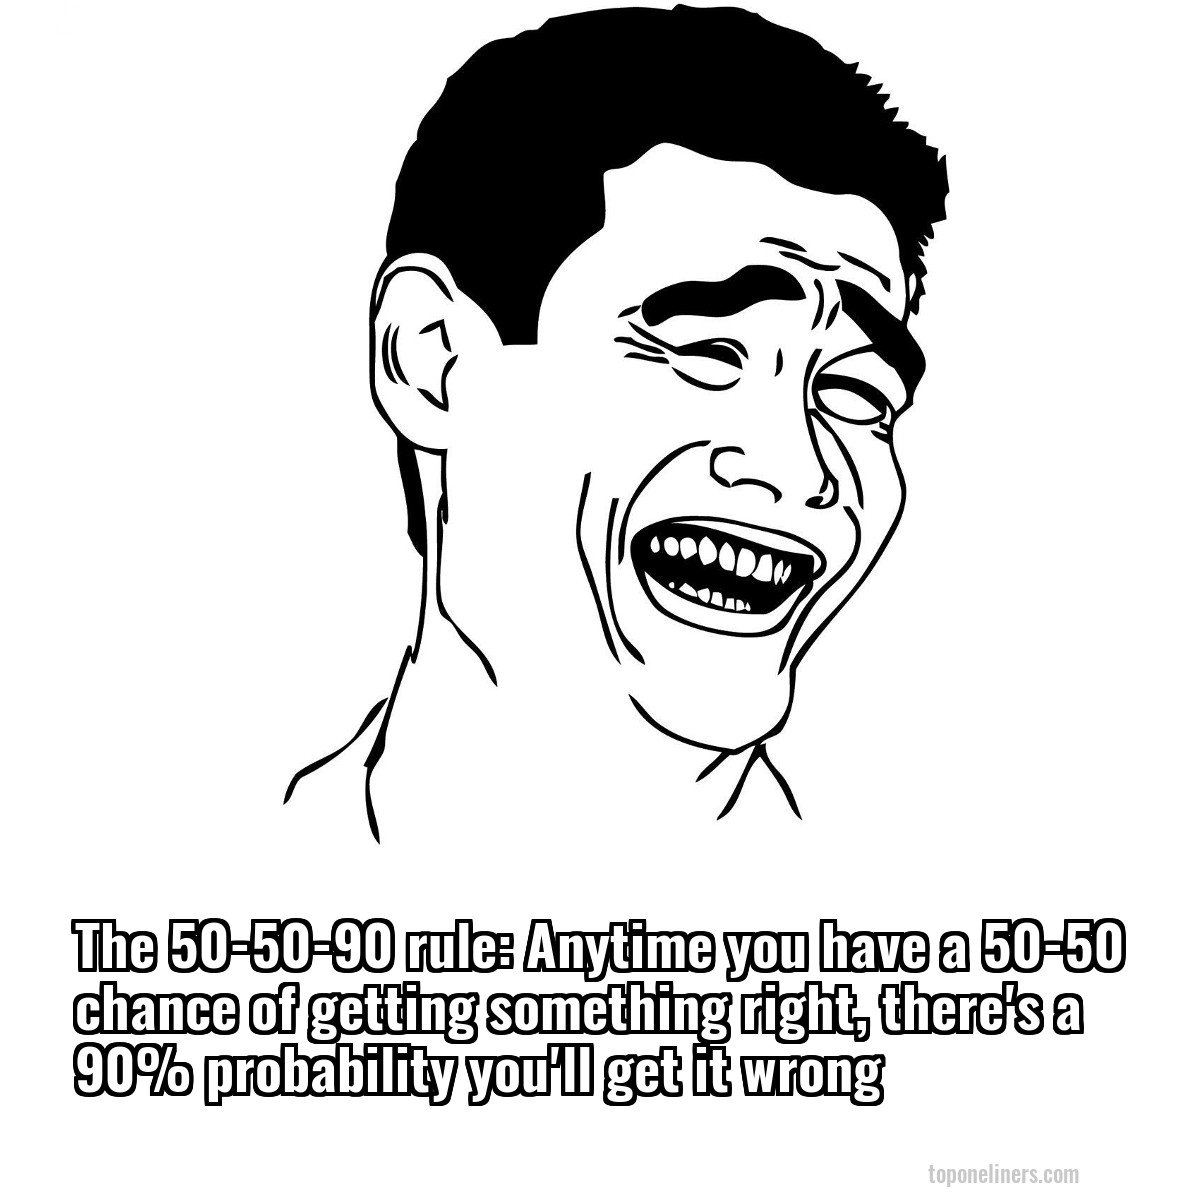 The 50-50-90 rule: Anytime you have a 50-50 chance of getting something right, there's a 90% probability you'll get it wrong